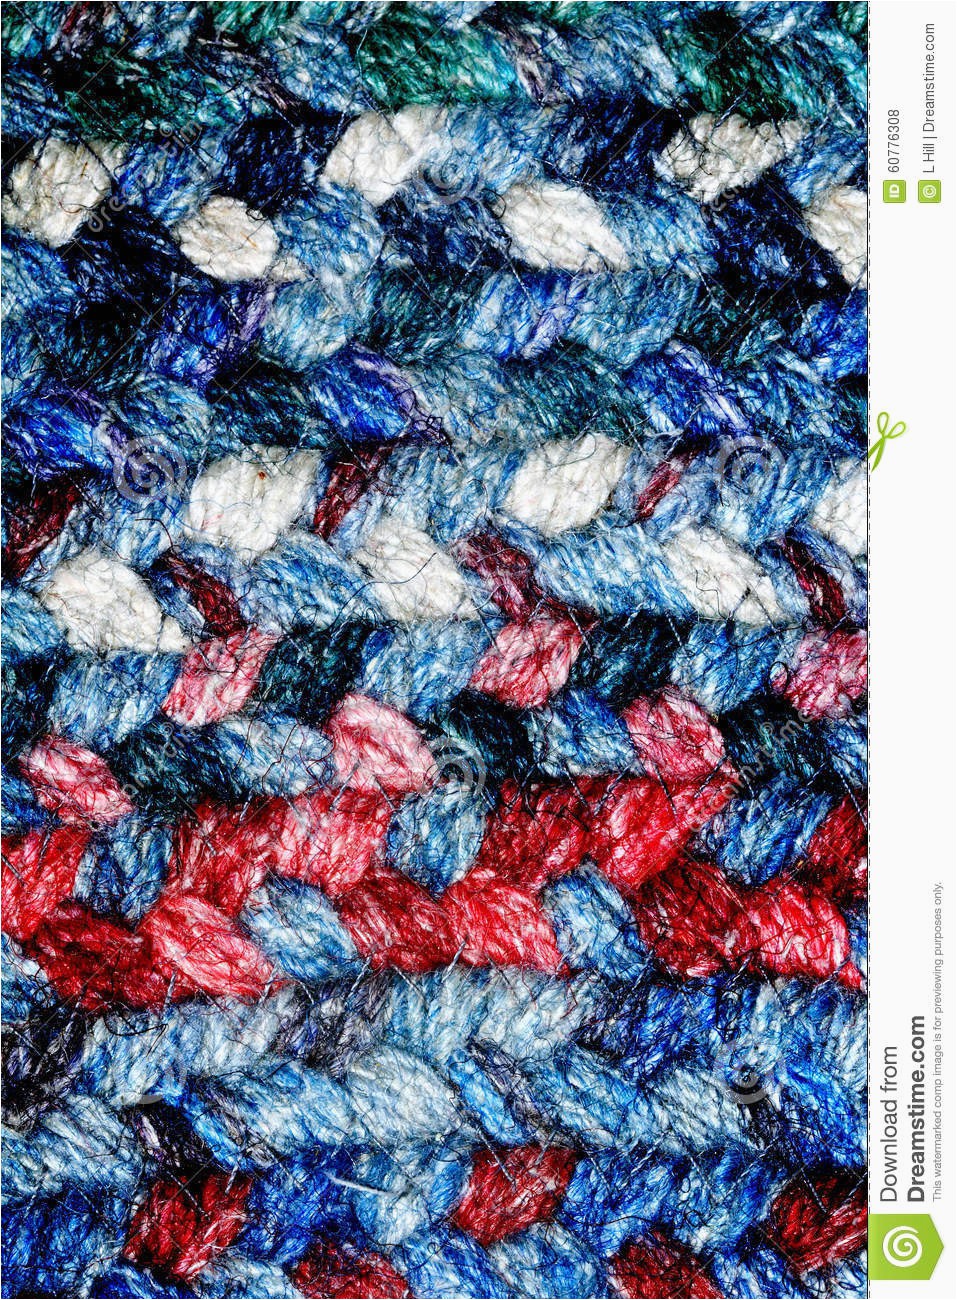 Red White and Blue Braided Rugs Red White and Blue Braided Rug Stock Image Of